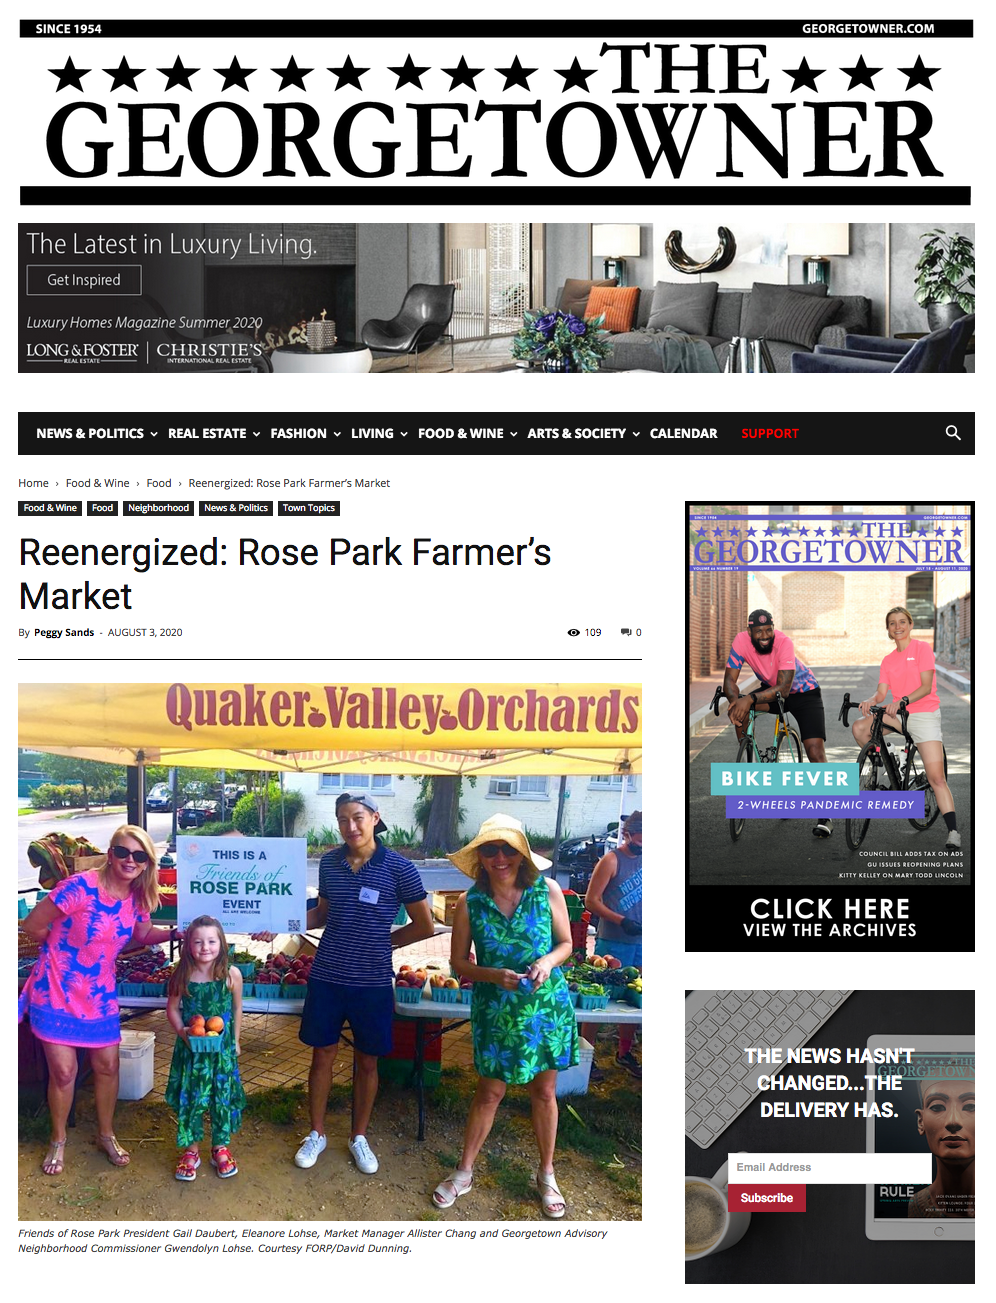 Image of feature spread on Friends of Rose Park Farmers Market in the August 3, 2020 version of Georgetowner Magazine.